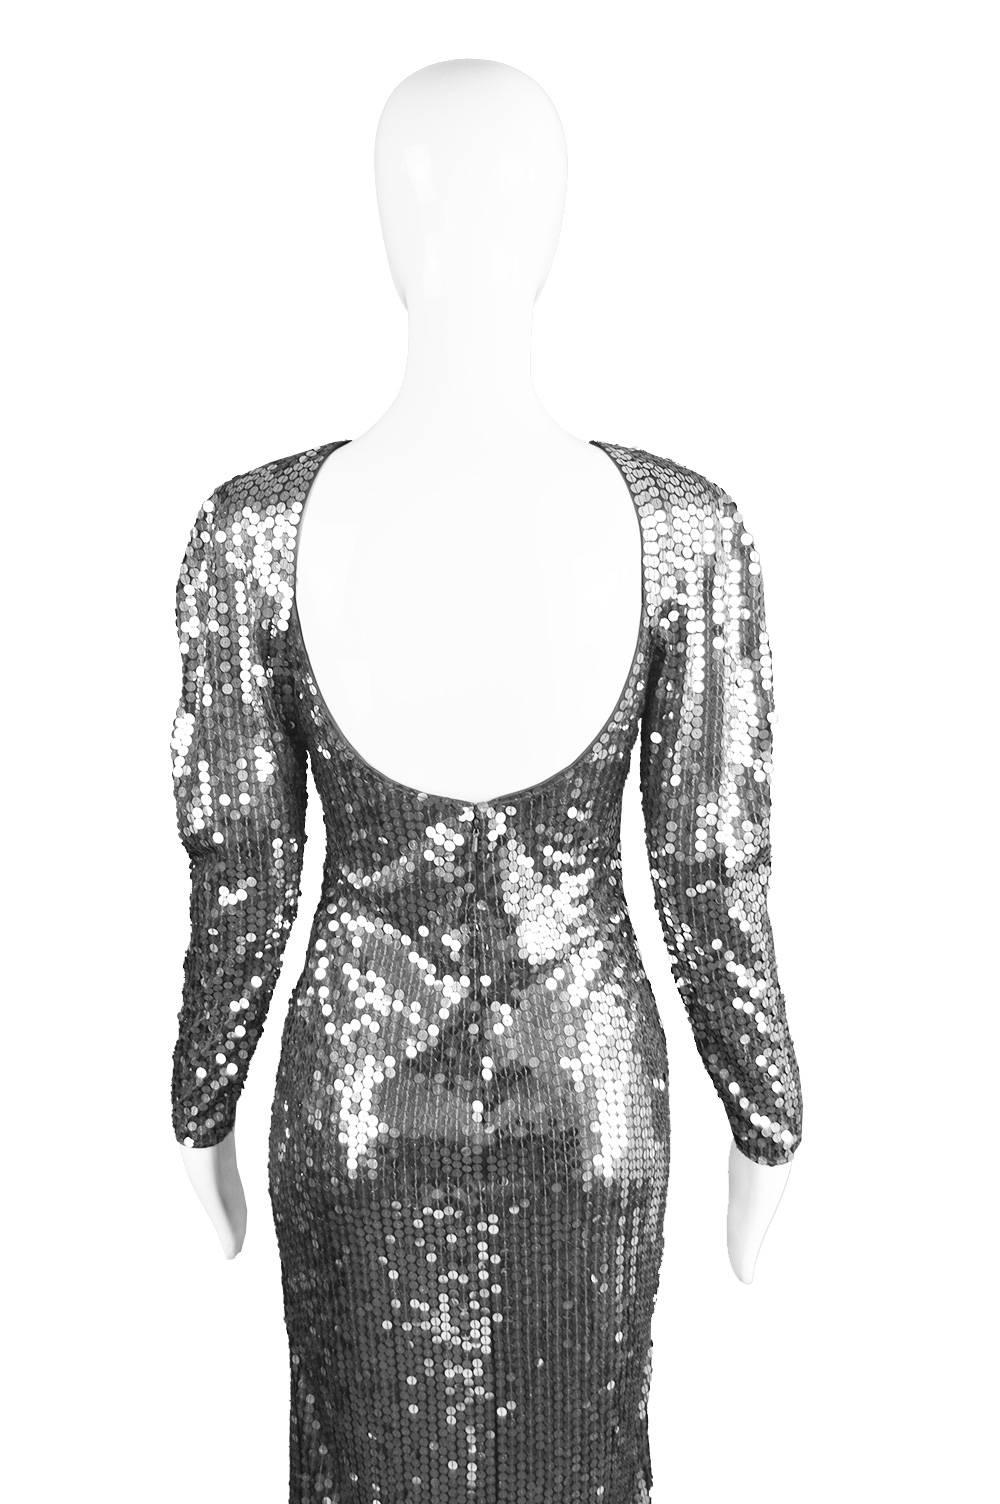 Halston Silver Sequin Dress with Deep Scoop Back, 1970s For Sale 3